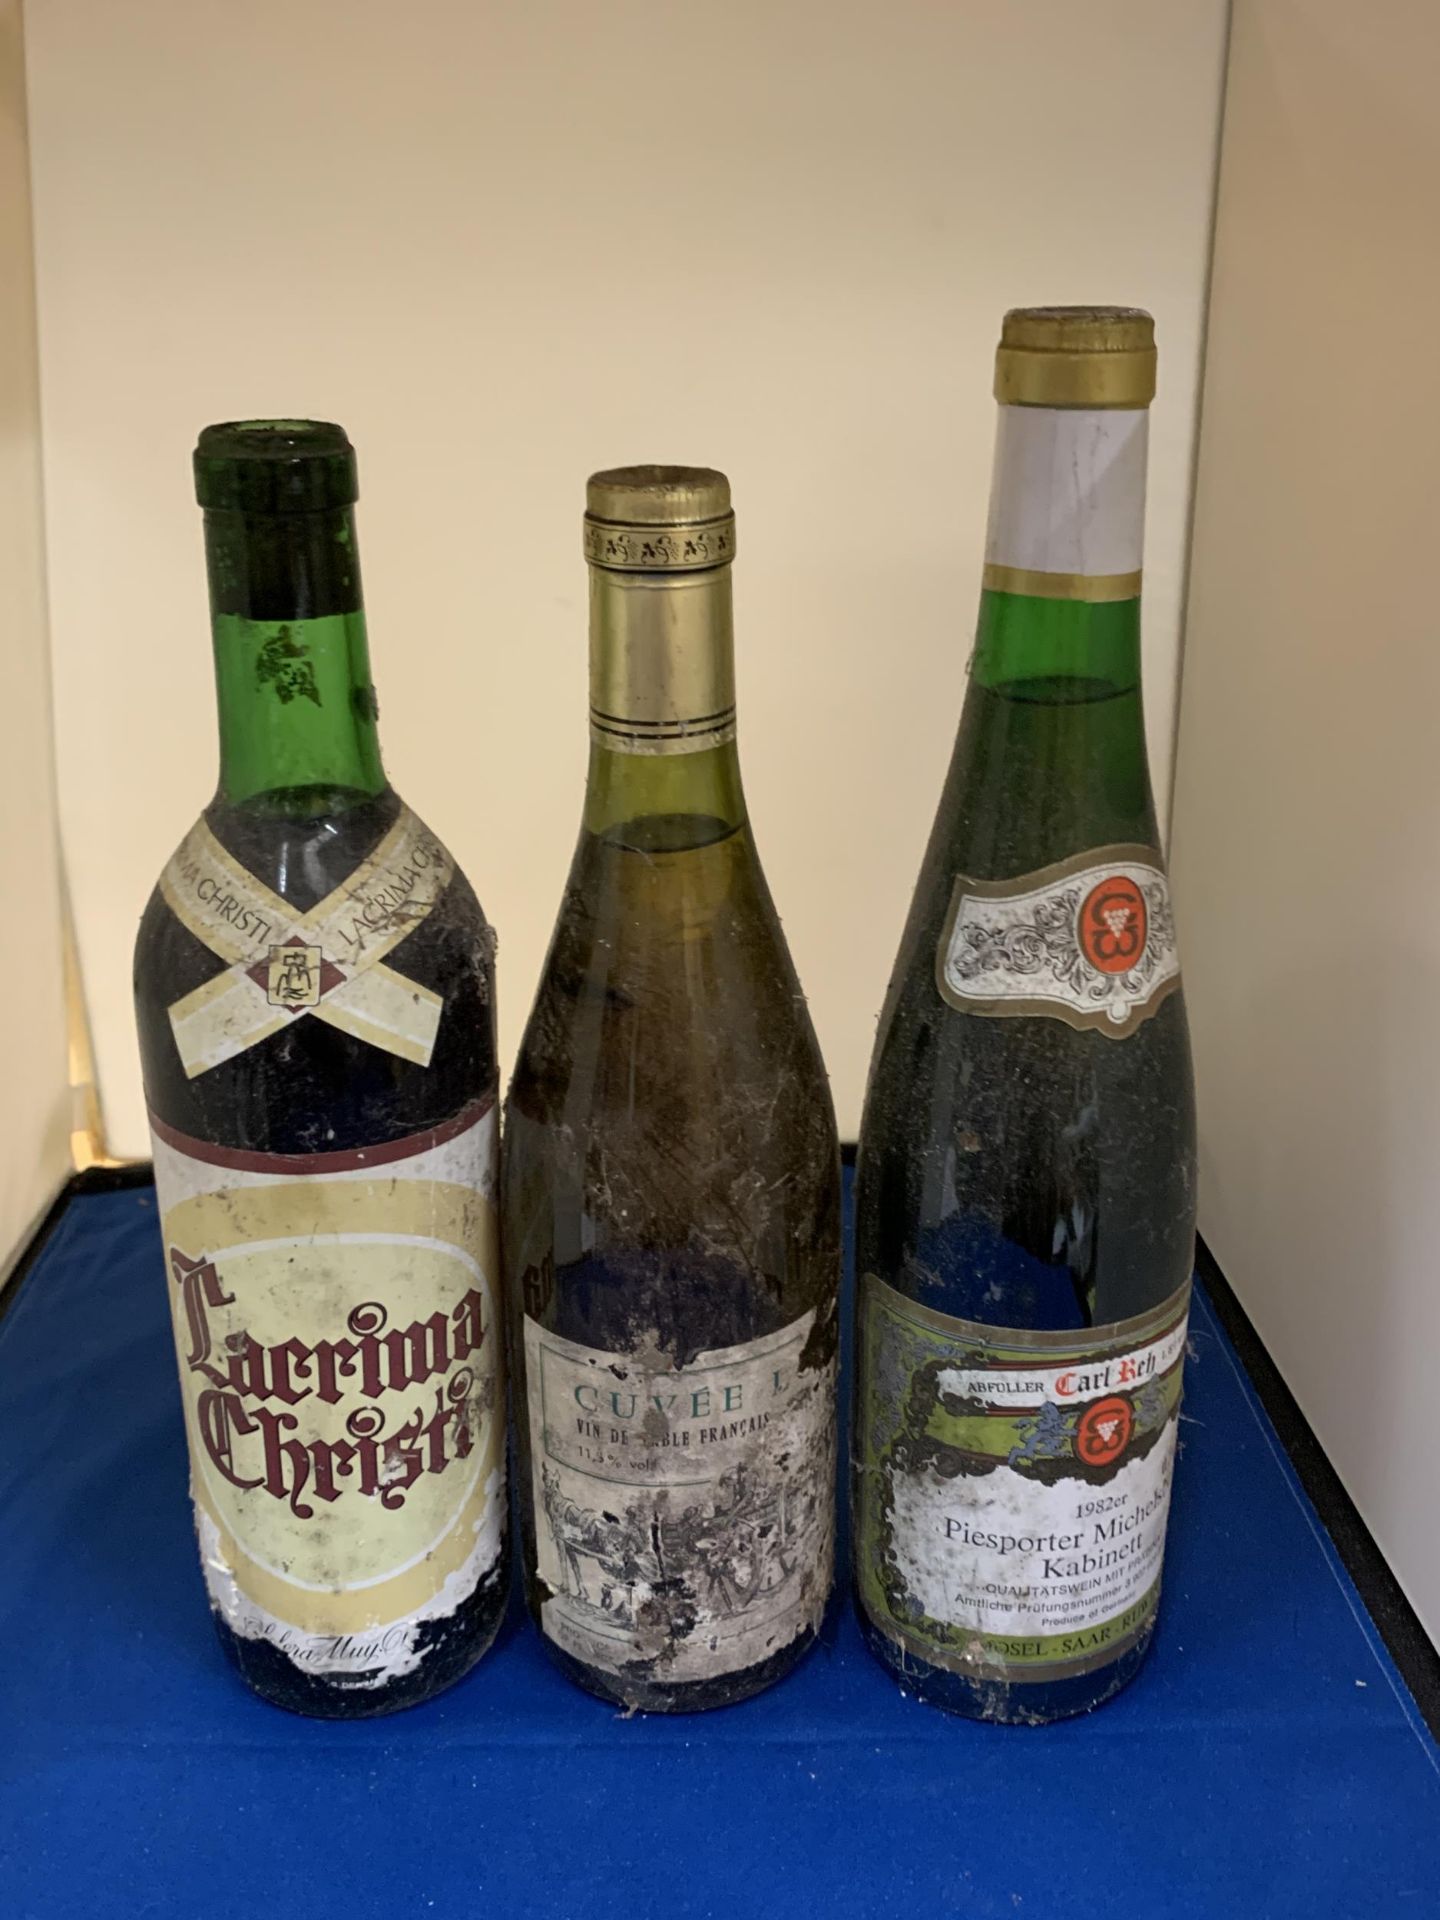 THREE BOTTLES TO INCLUDE A LACRIMA CHRISTI, A CUVEE AND A 1982 PIESPORTER